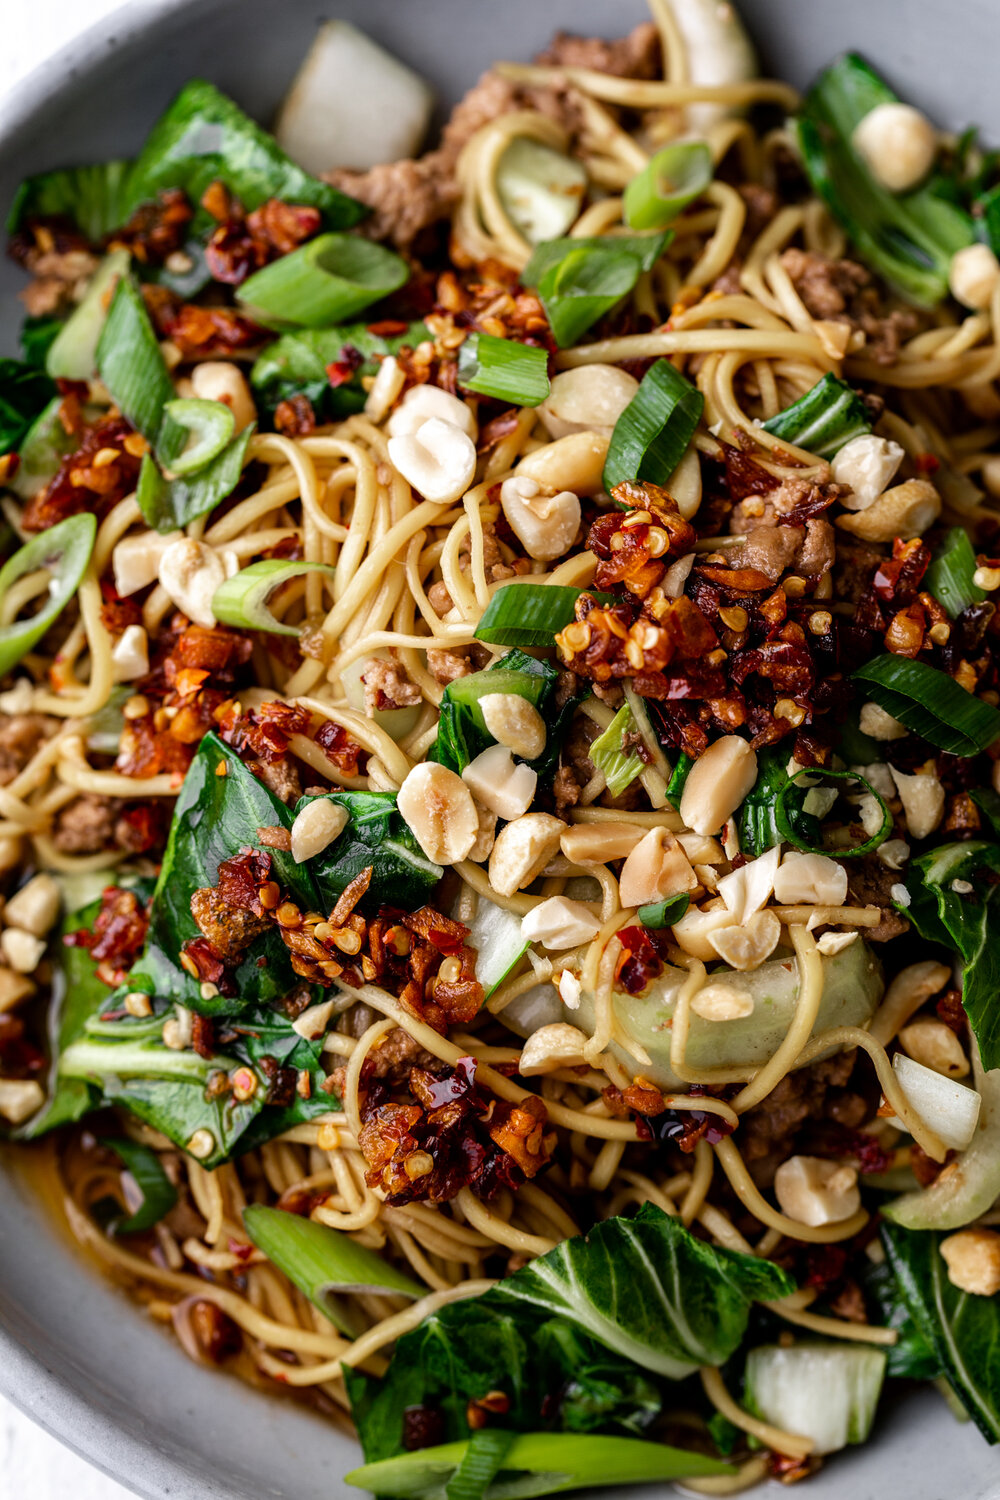 Spicy Dan Dan Noodles with Bok Choy & Crunchy Chili Oil